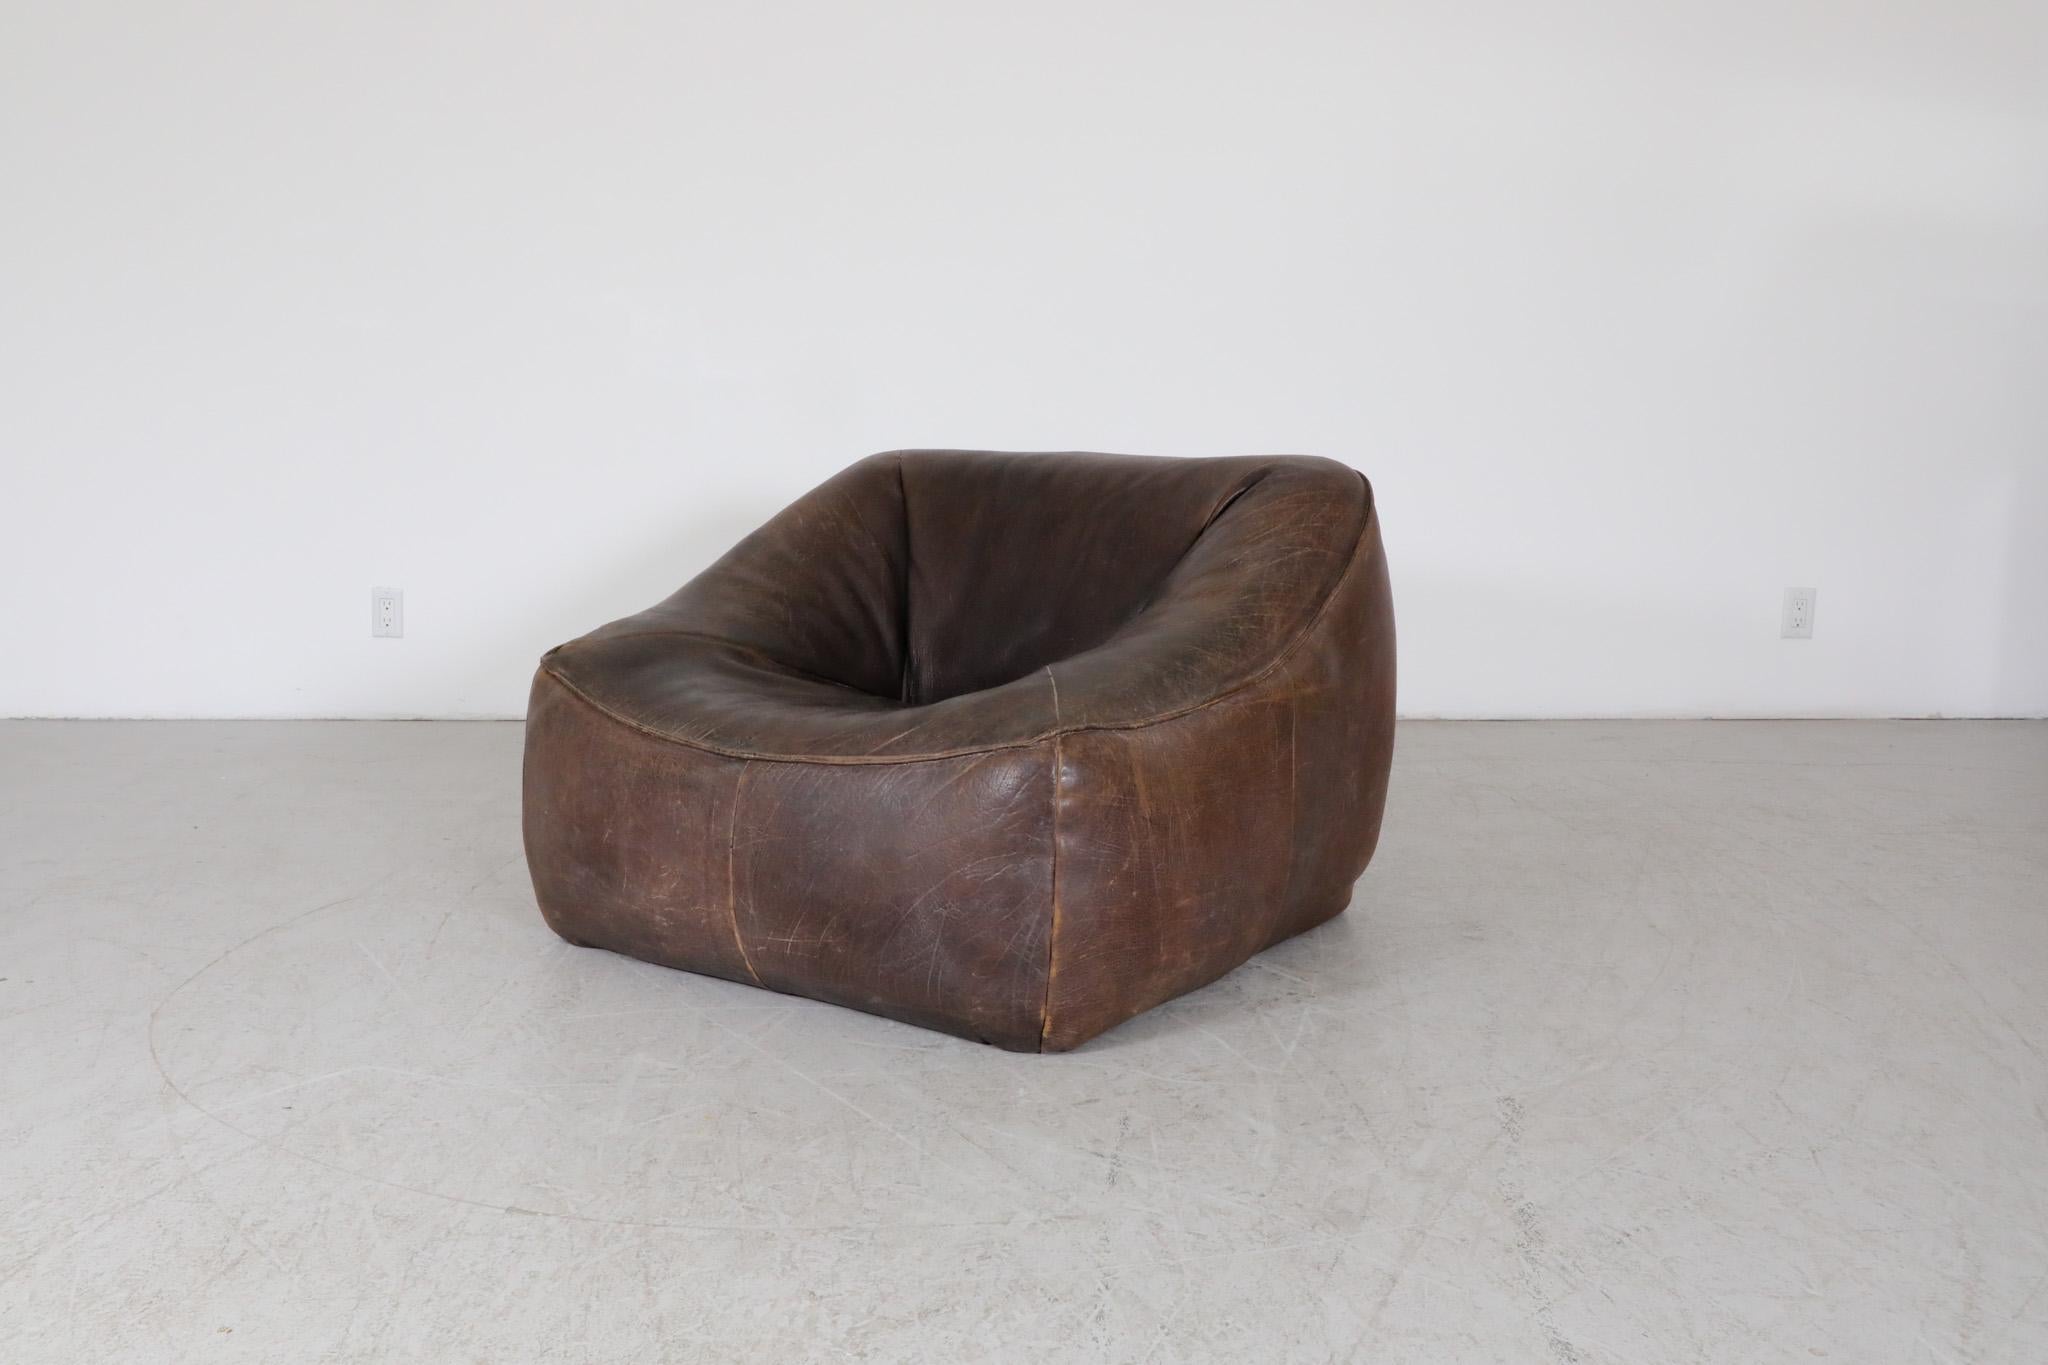 Mid-Century 'Ringo' lounge chair by Gerard Van Den Berg for Montis, 1970s. Comfy soft form sofa with thick leather upholstery and lovely patina. Mid-Century 'Ringo' lounge chair designed by Gerard Van Den Berg for Montis. Soft form sofa with thick